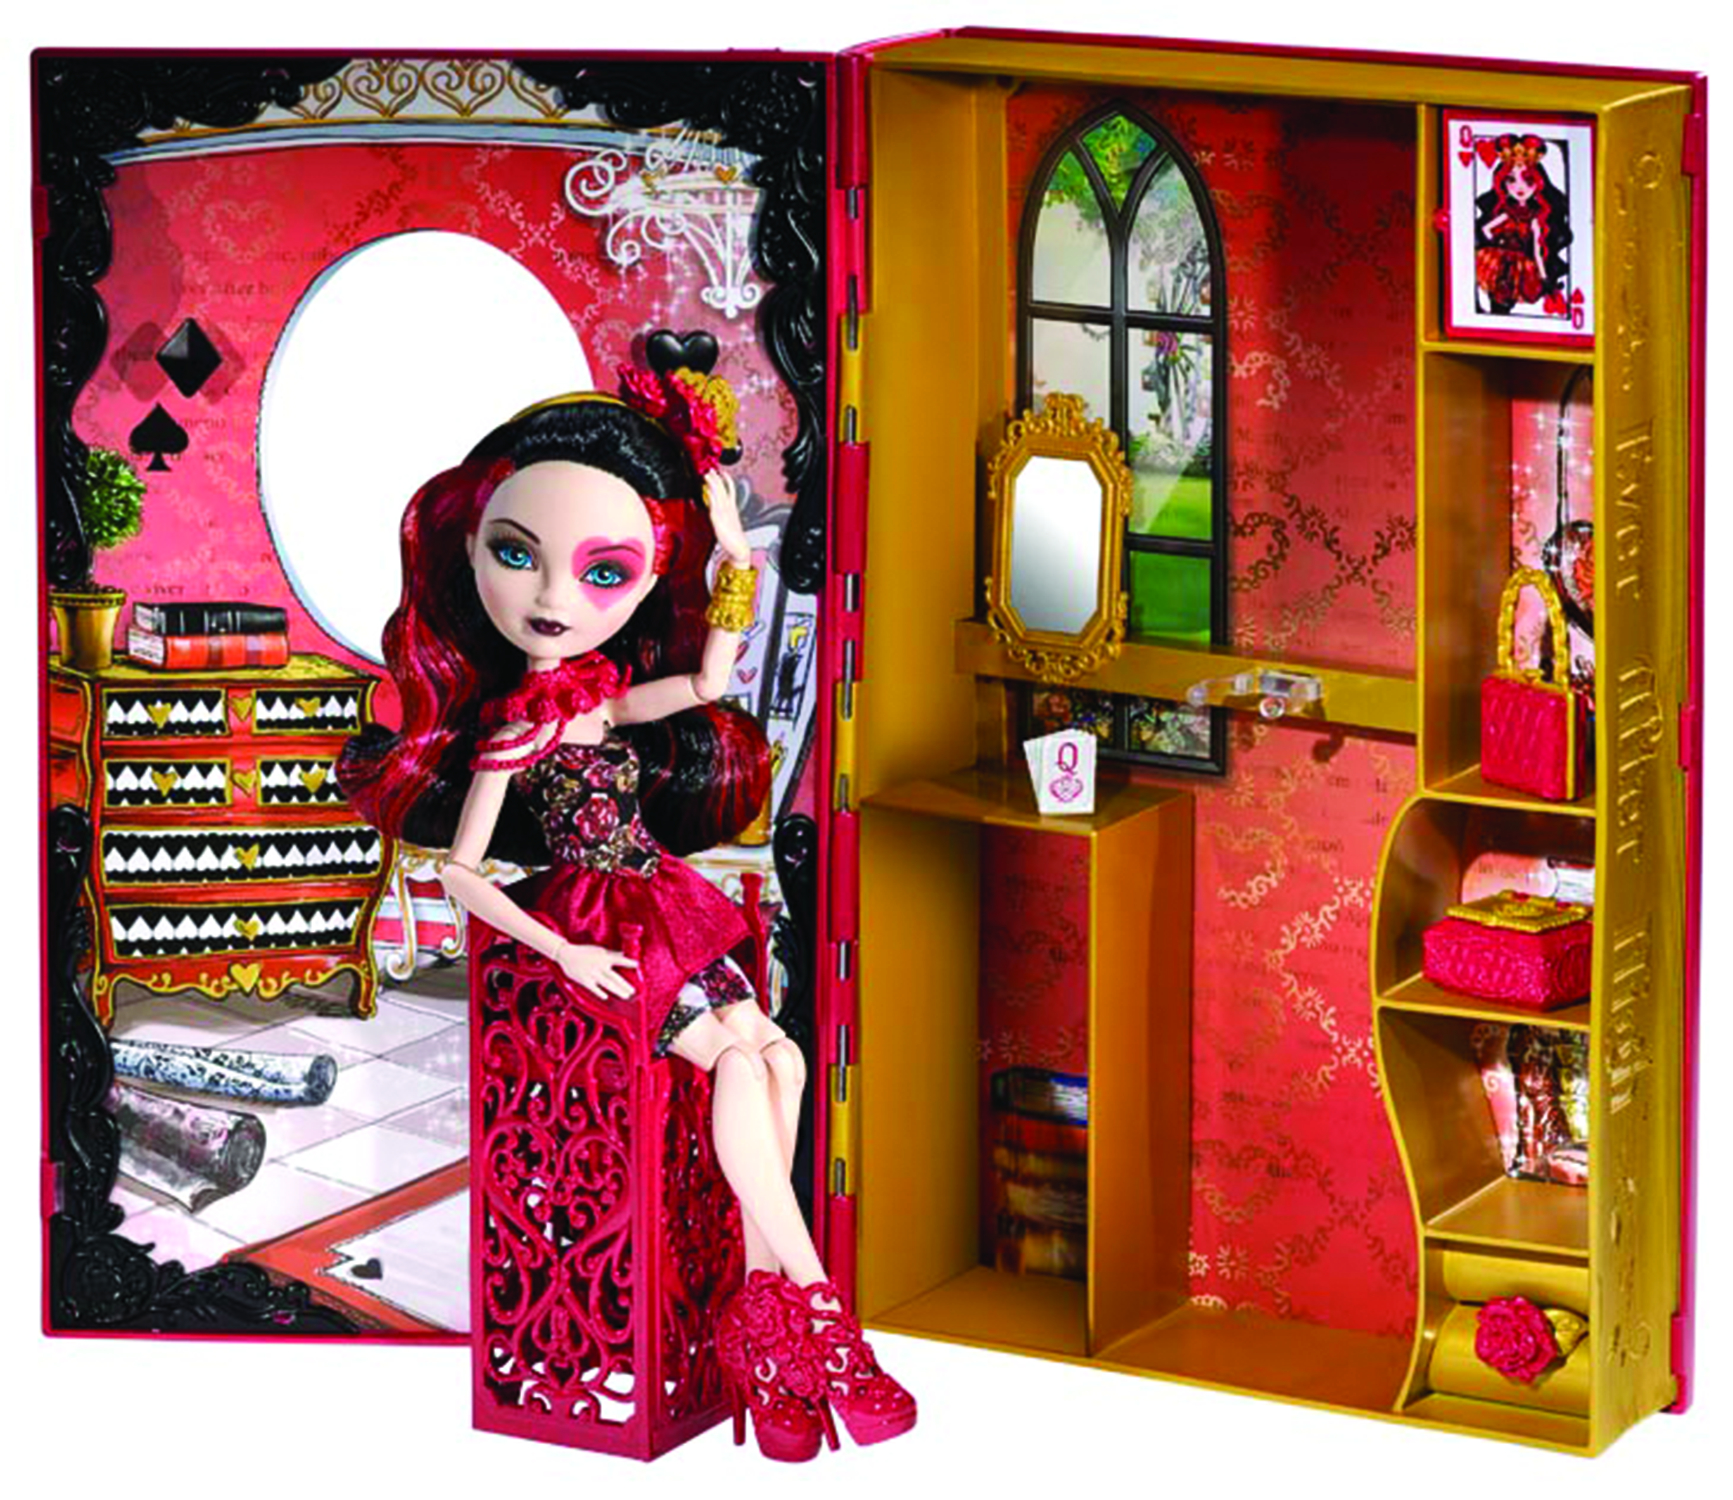 lizzie hearts ever after high doll